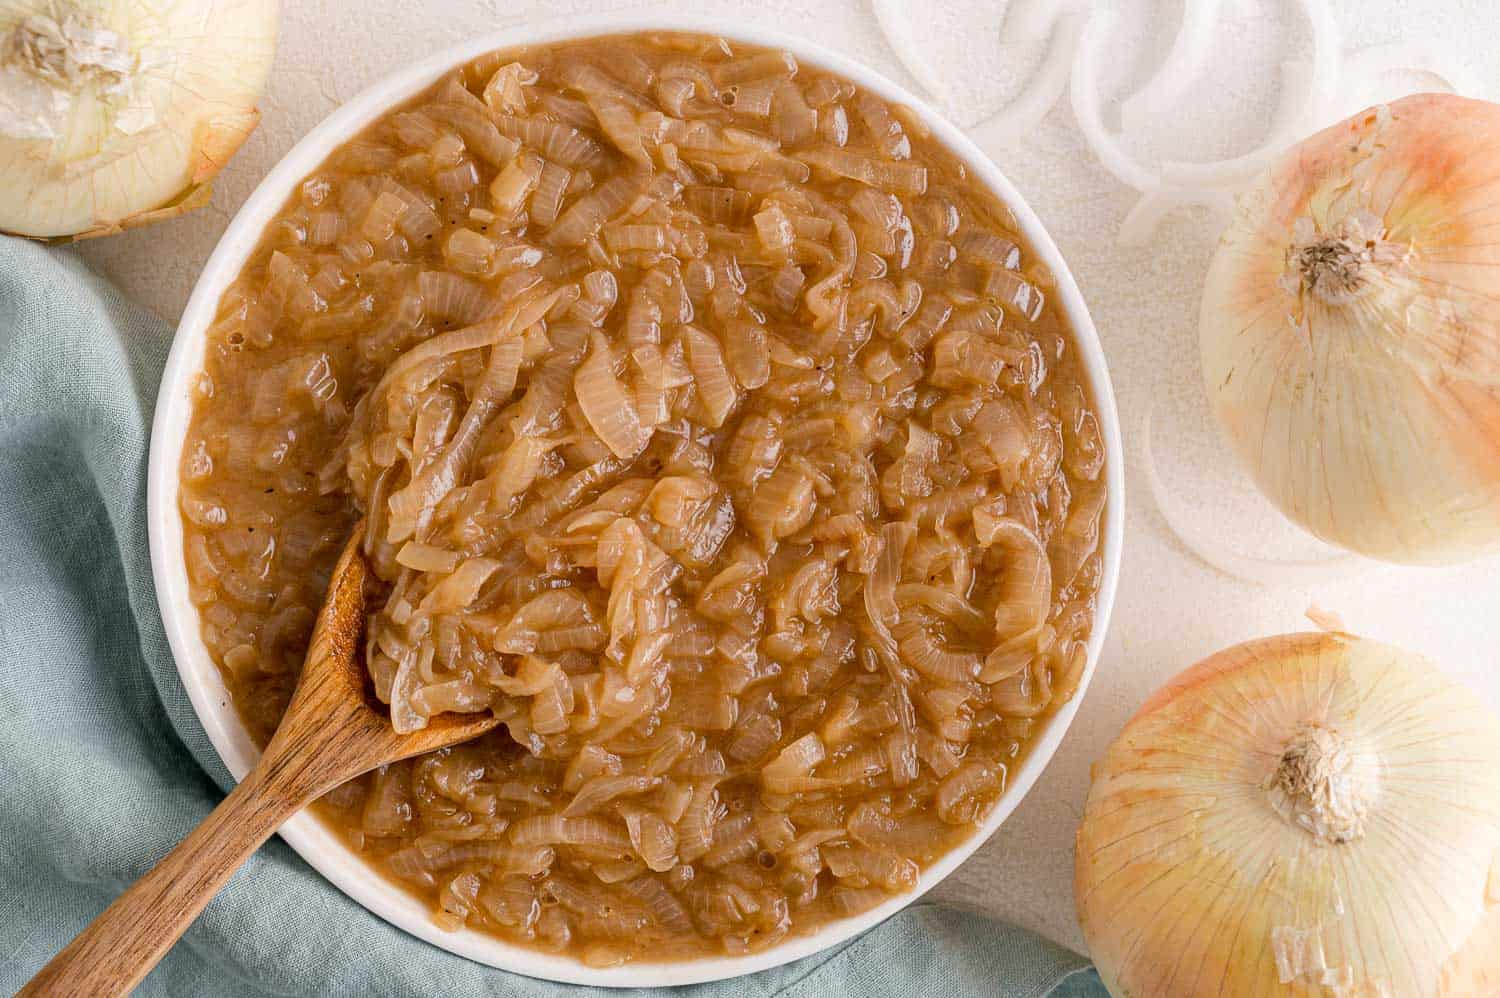 Caramelized onions in a bowl with wooden spoon.